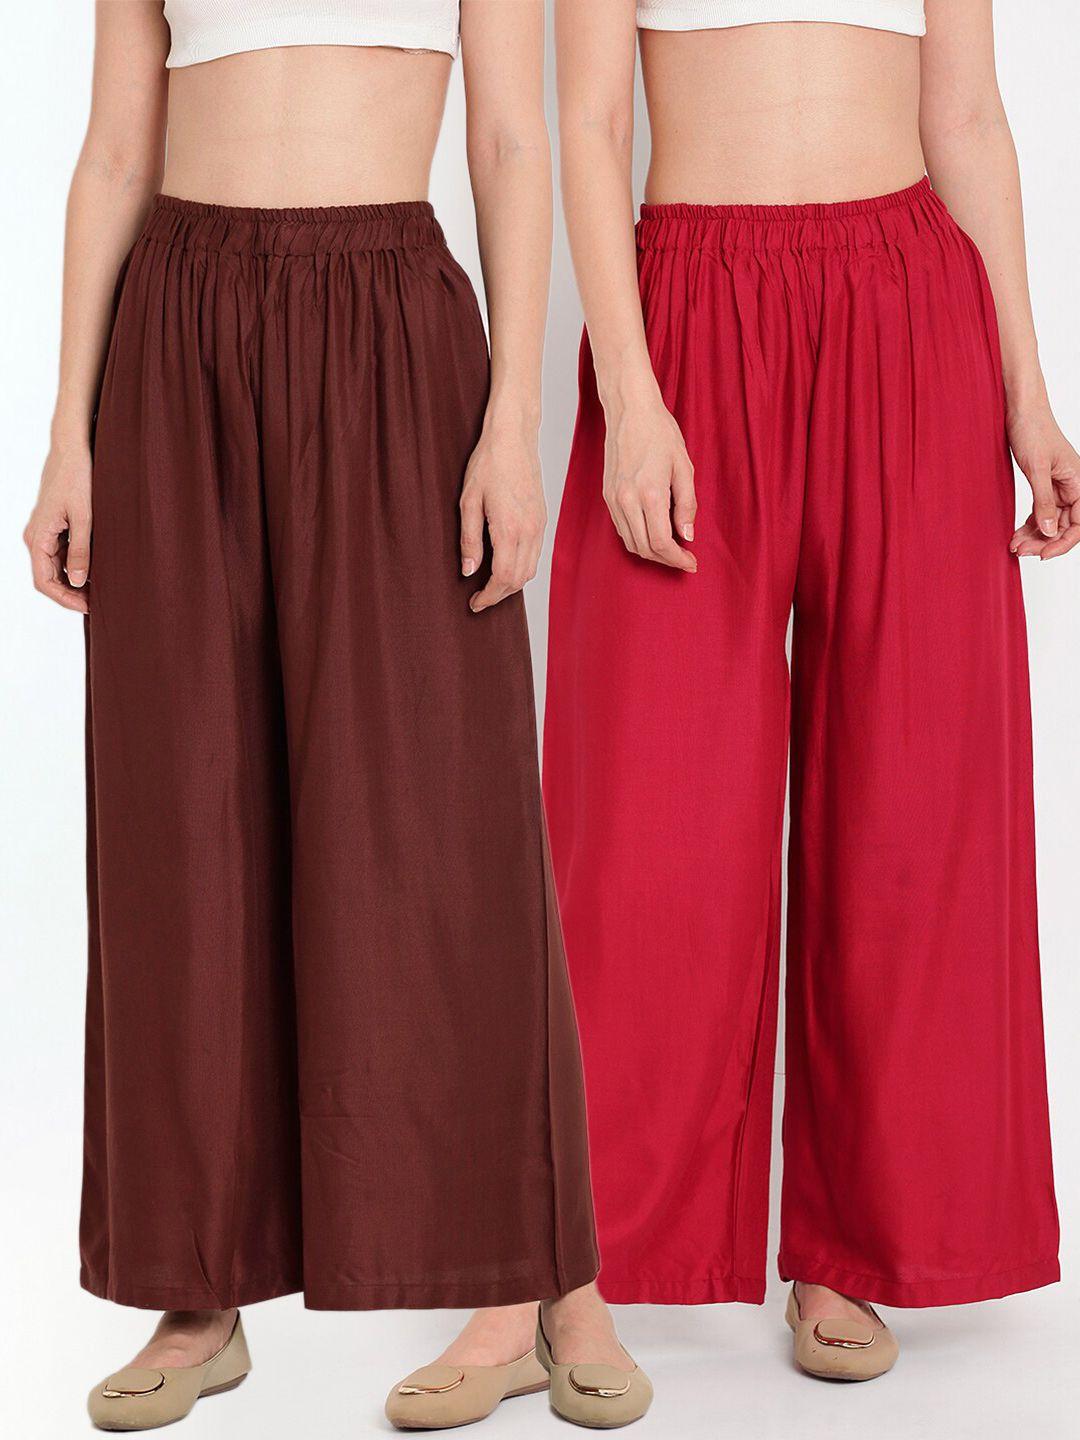 tag 7 women brown & maroon set of 2 flared ethnic palazzos